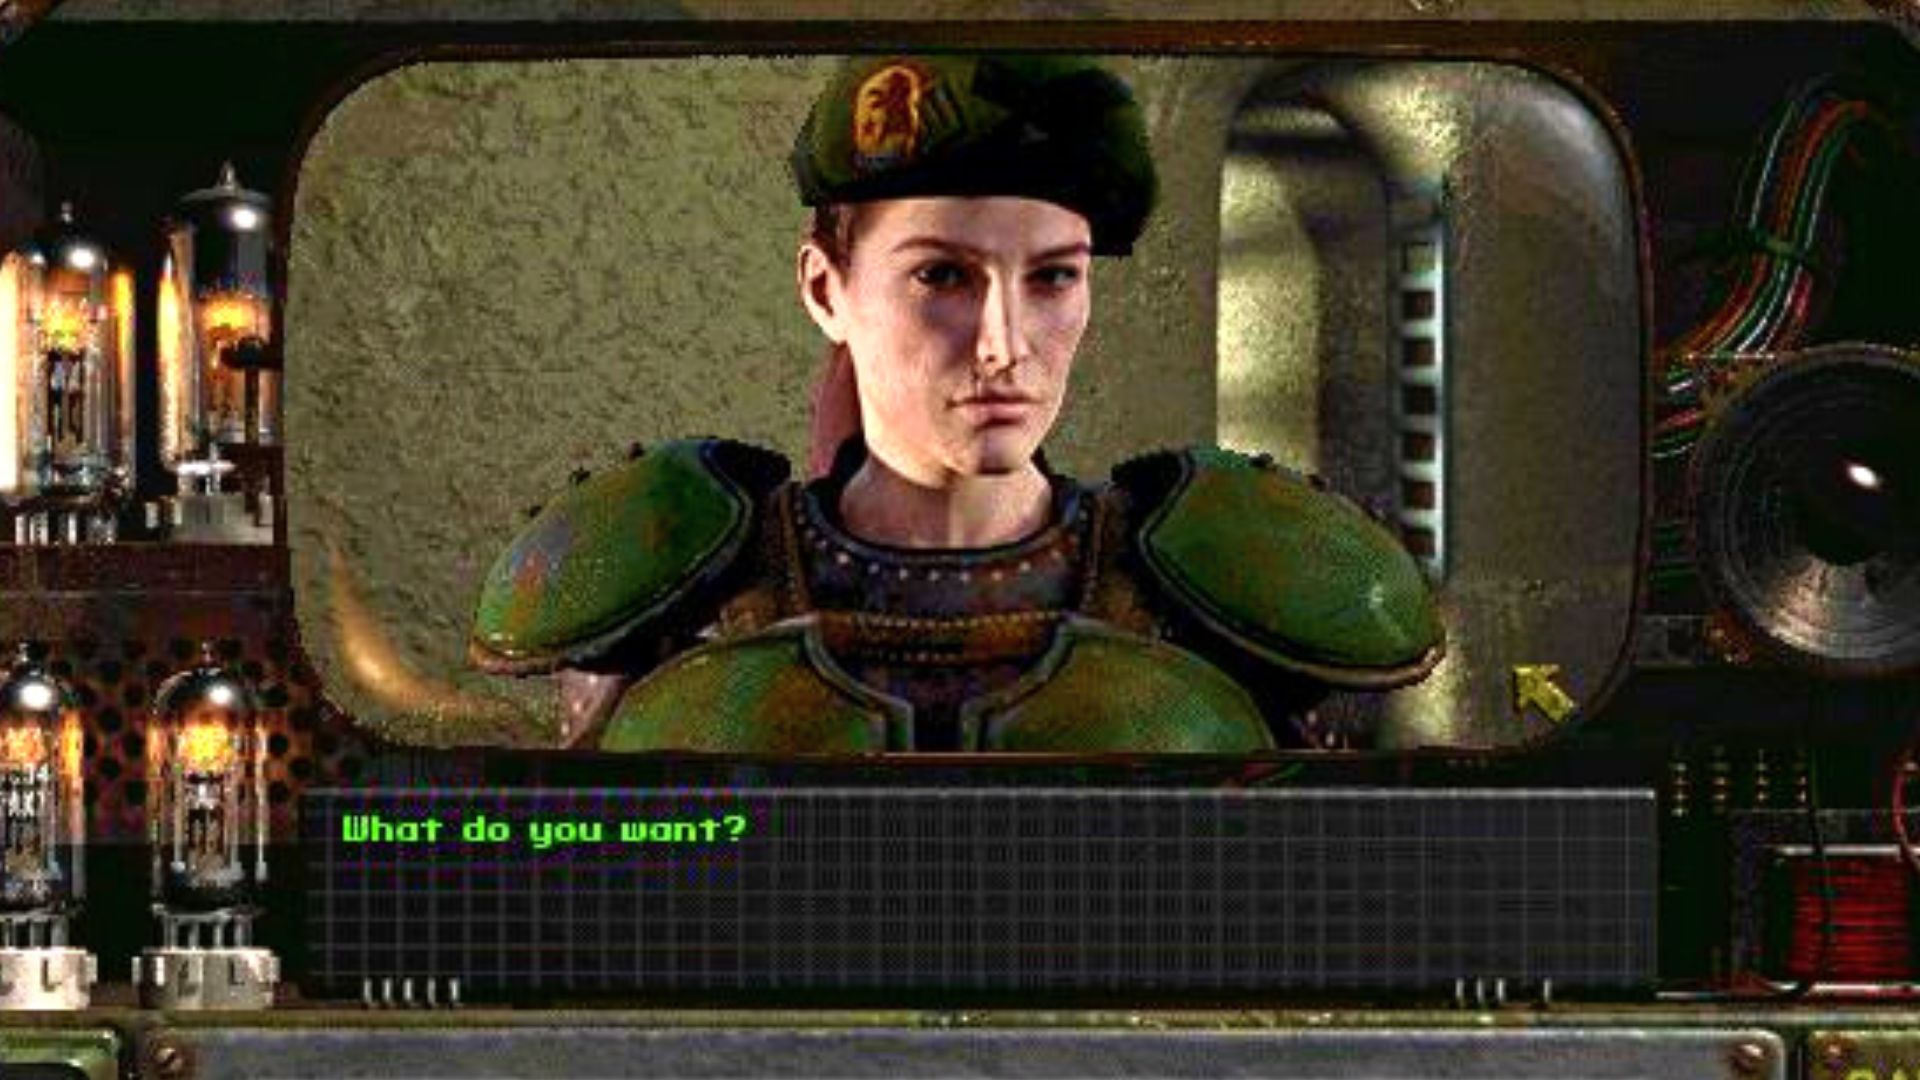 Fallout 2: A Post Nuclear Role Playing Game on Steam